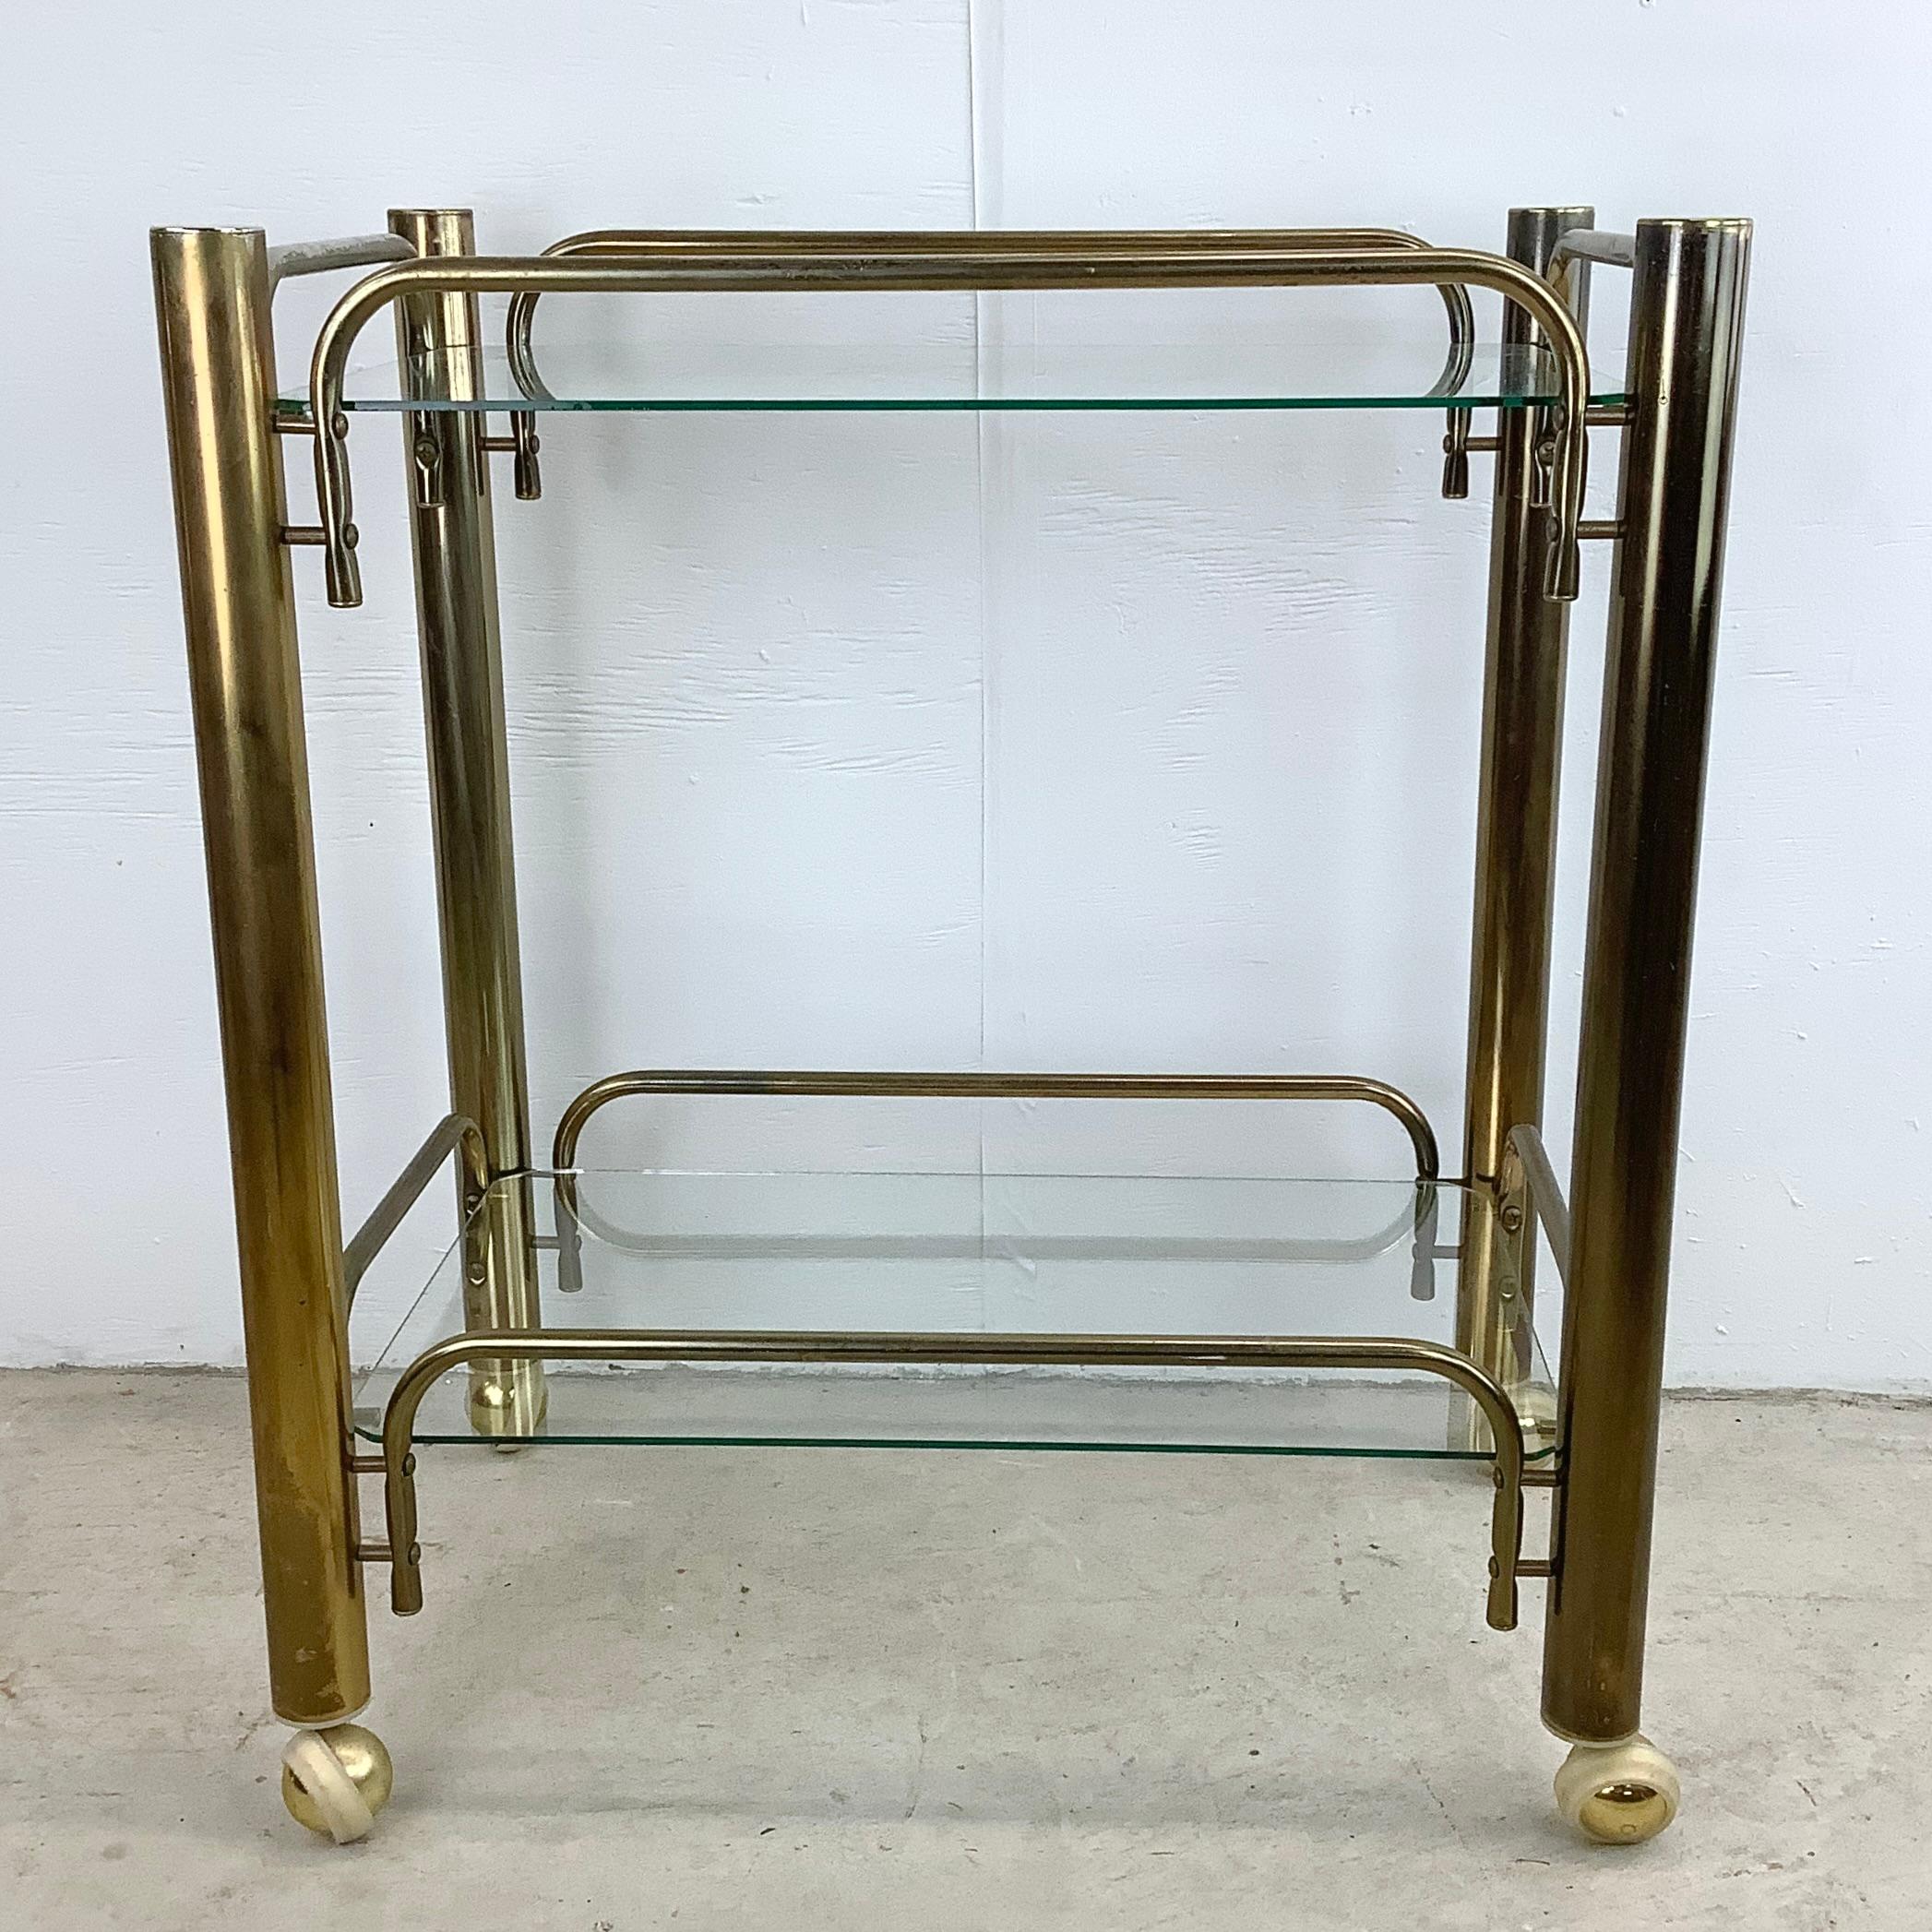 Introducing this Vintage Modern Brass Finish Metal and Glass Bar Cart, a stunning piece that exudes timeless glamour and functionality. Available now, this bar cart is a true vintage gem that adds a touch of elegance to your entertaining